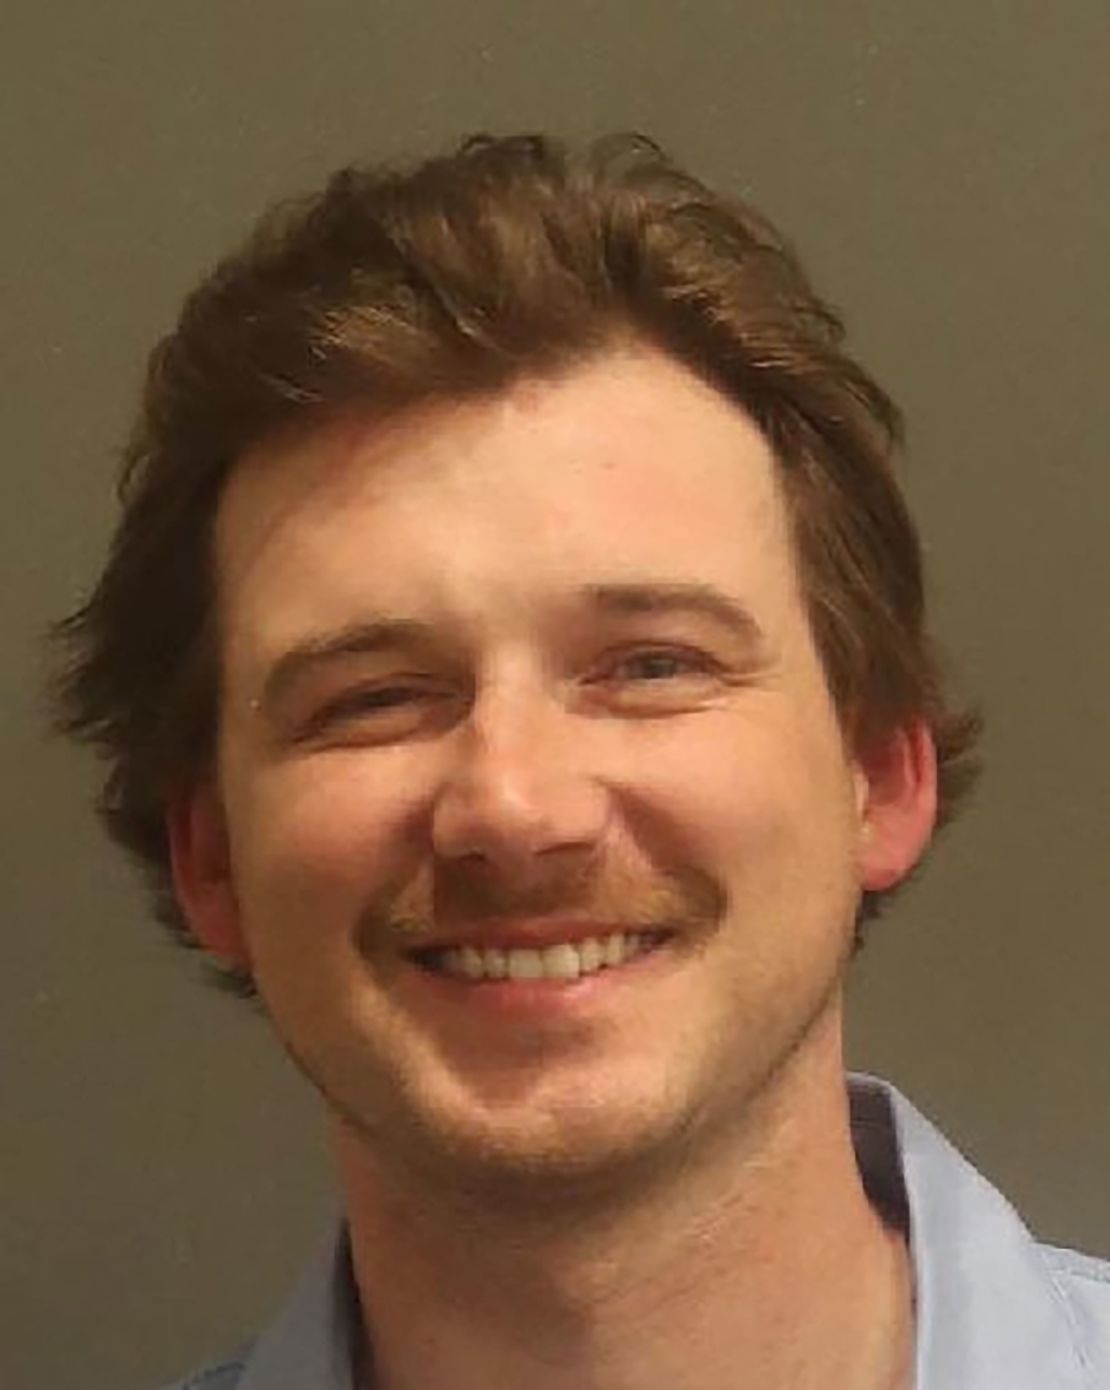 Country singer Morgan Wallen, 30, was arrested on three felony charges of reckless endangerment for throwing a chair from the rooftop of Chief's Bar in downtown Nashville Sunday night, Metropolitan Nashville Police Department said in an X <a href="https://twitter.com/MNPDNashville/status/1777319642039558208" target="_blank">post</a> Monday morning.